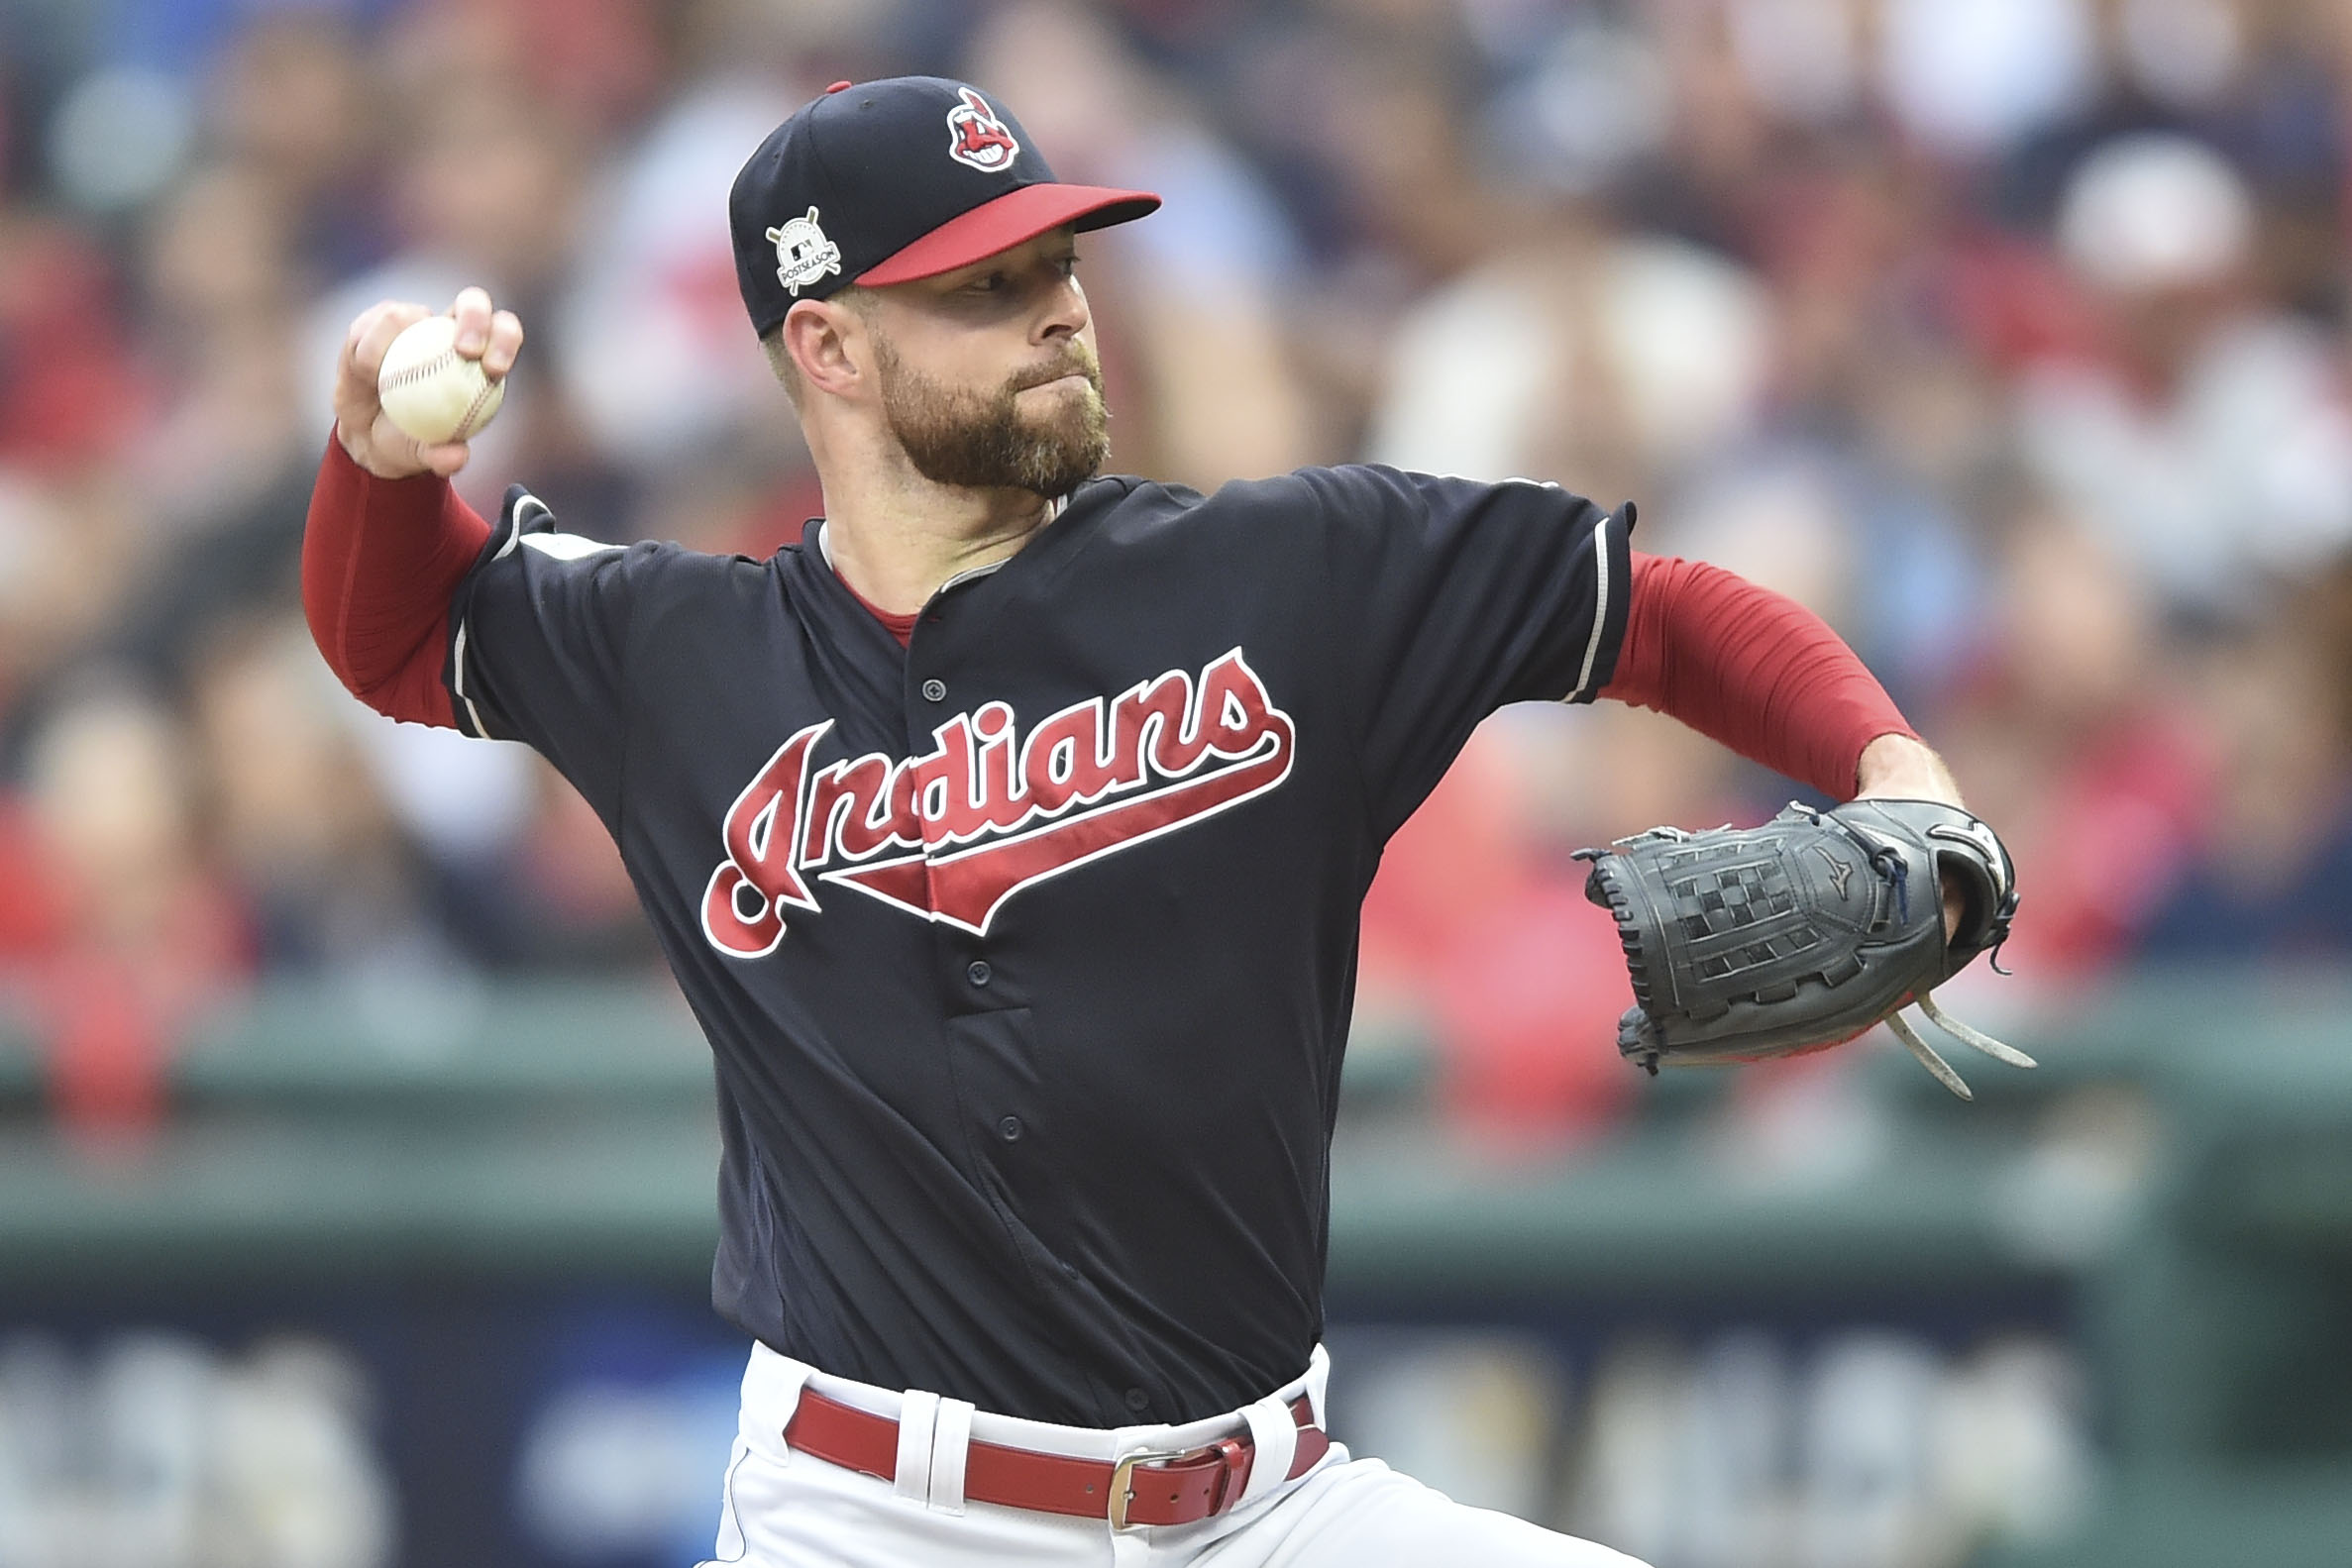 LIVE UPDATES Cleveland Indians address media ahead of Wednesdays Game 5 matchup with Yankees wkyc